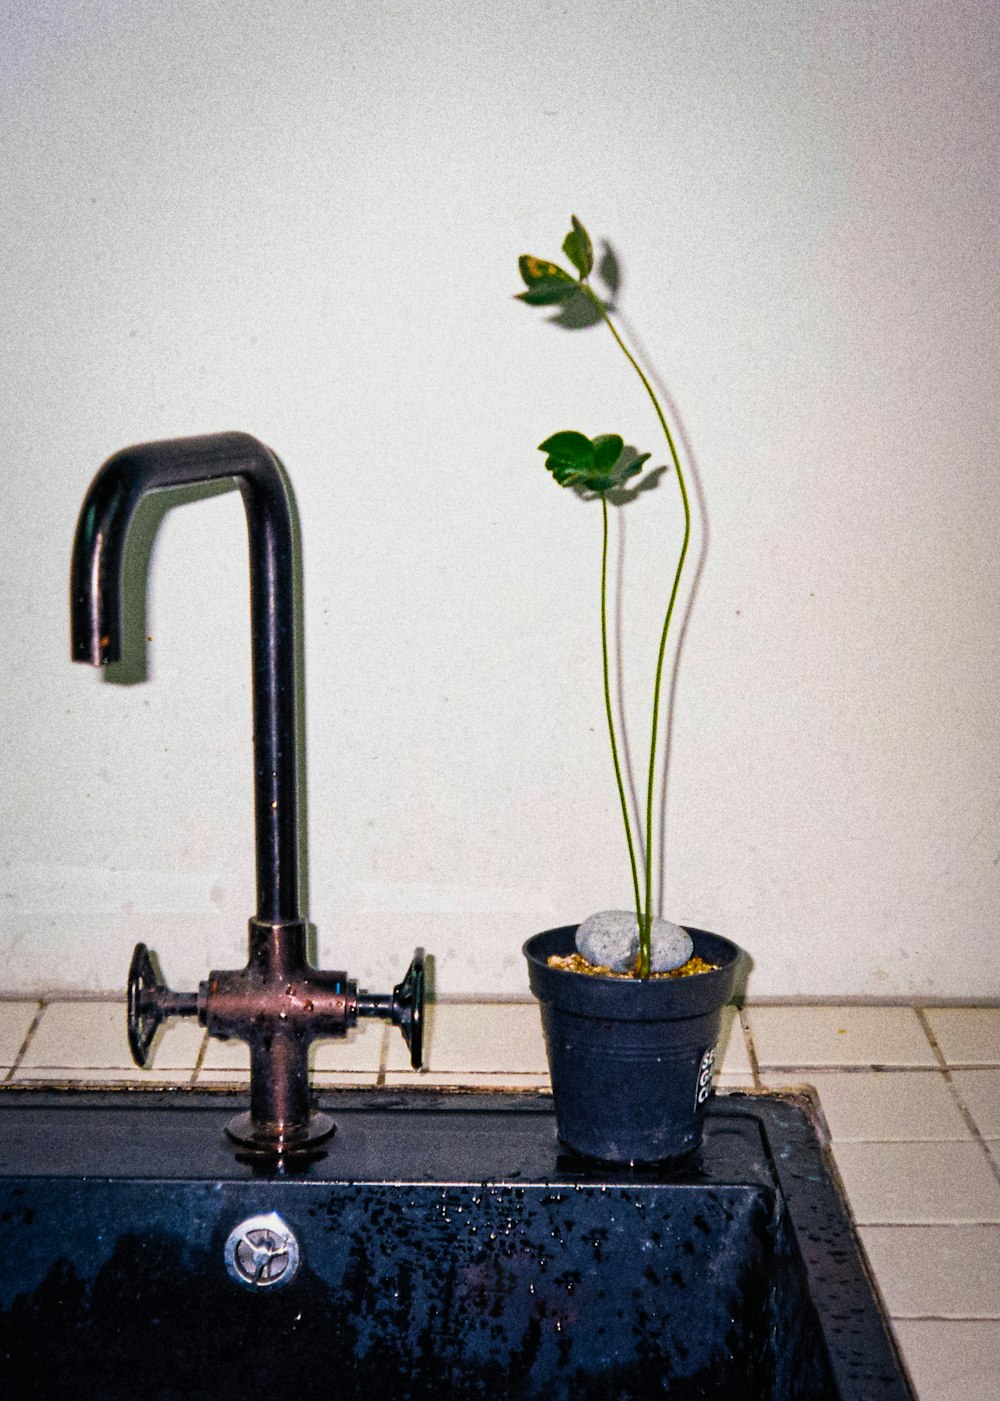 a potted plant sitting on top of a sink